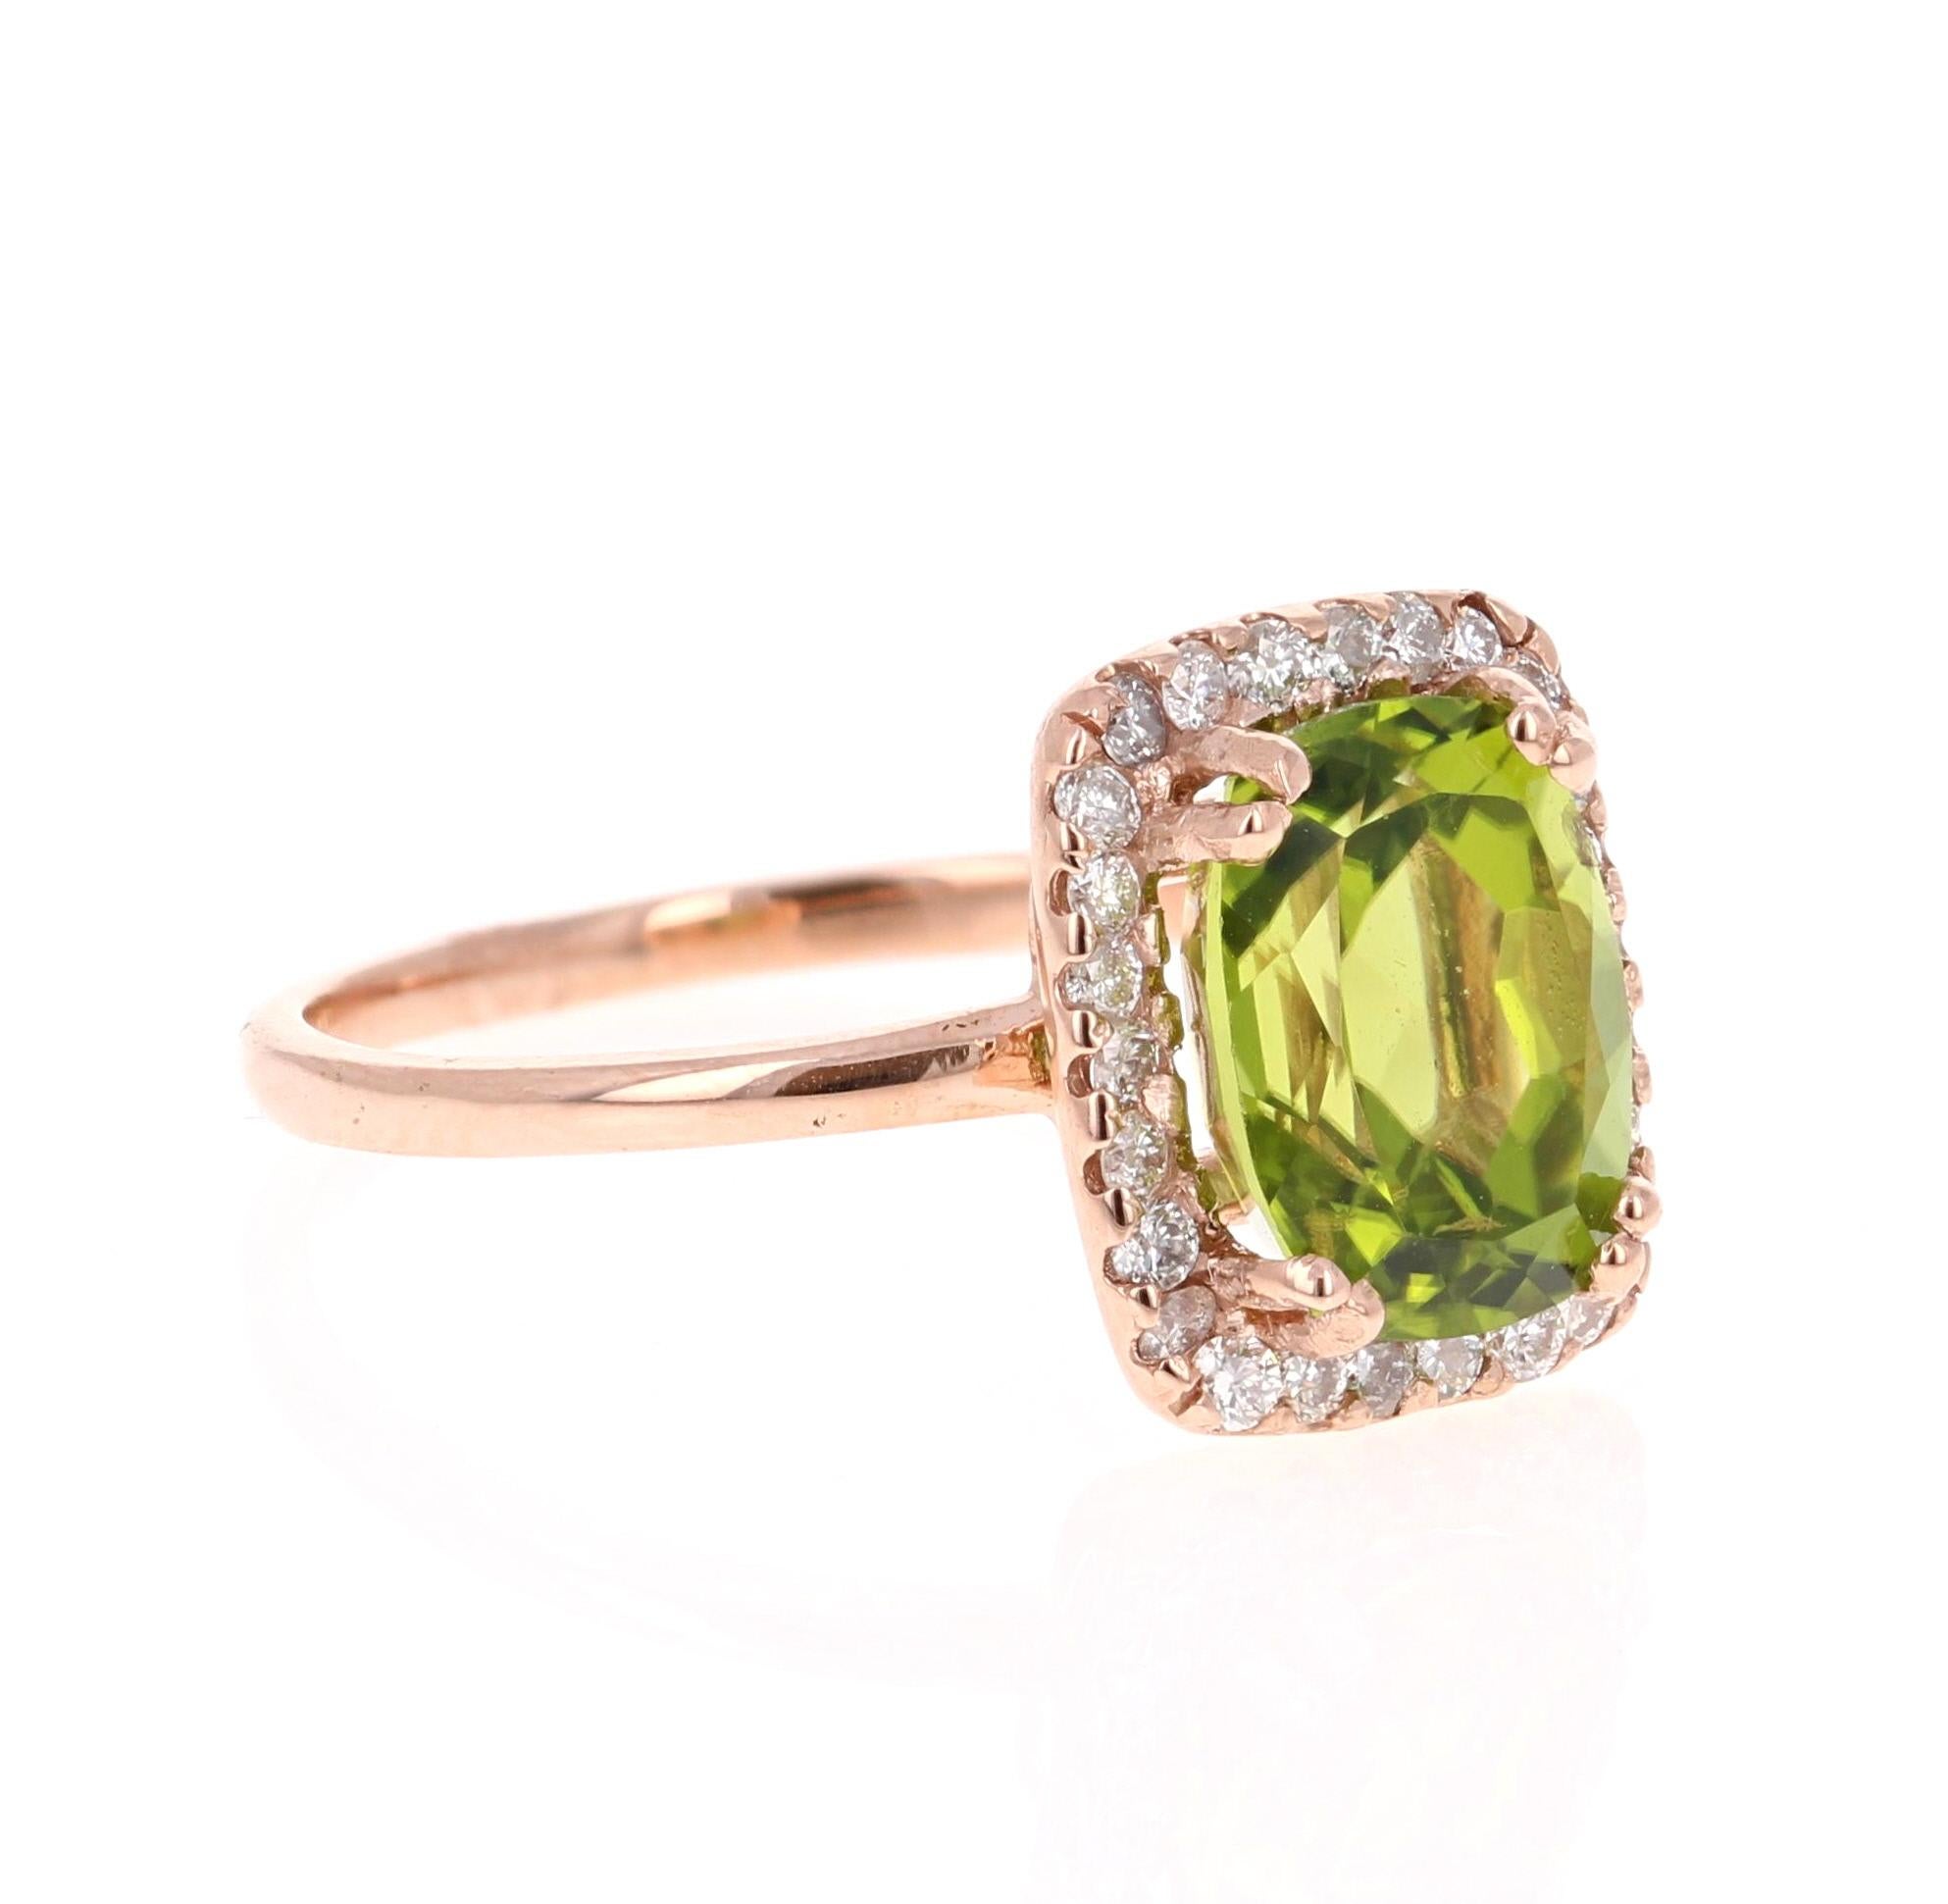 This Peridot and Diamond Ring has a 3.70 Carat Oval-Cushion Cut Peridot and has a halo of 26 Round Cut Diamonds weighing 0.37 Carats. The total carat weight of the ring is 4.07 Carats. 

It is set in 14 Karat Rose Gold and weighs approximate 3.2